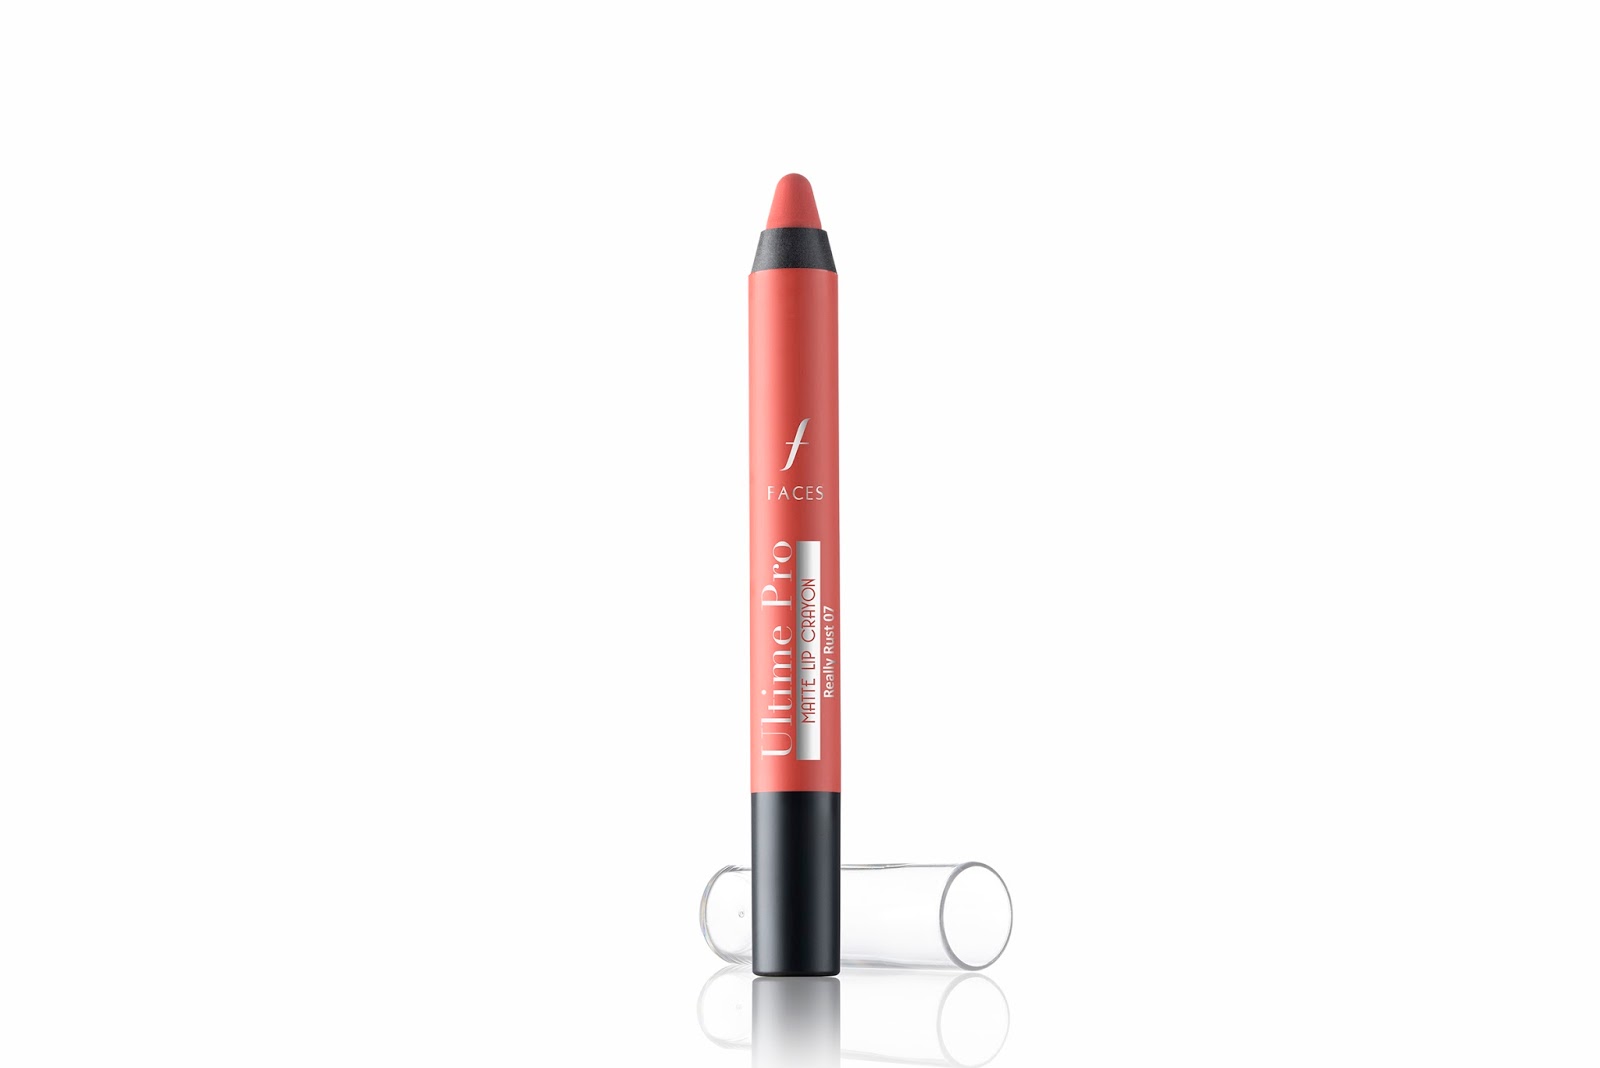 FACES Cosmetics Redefines Smoothness with the New Ultime Pro Lip Crayon| Press Note| Cherry On Top Blog